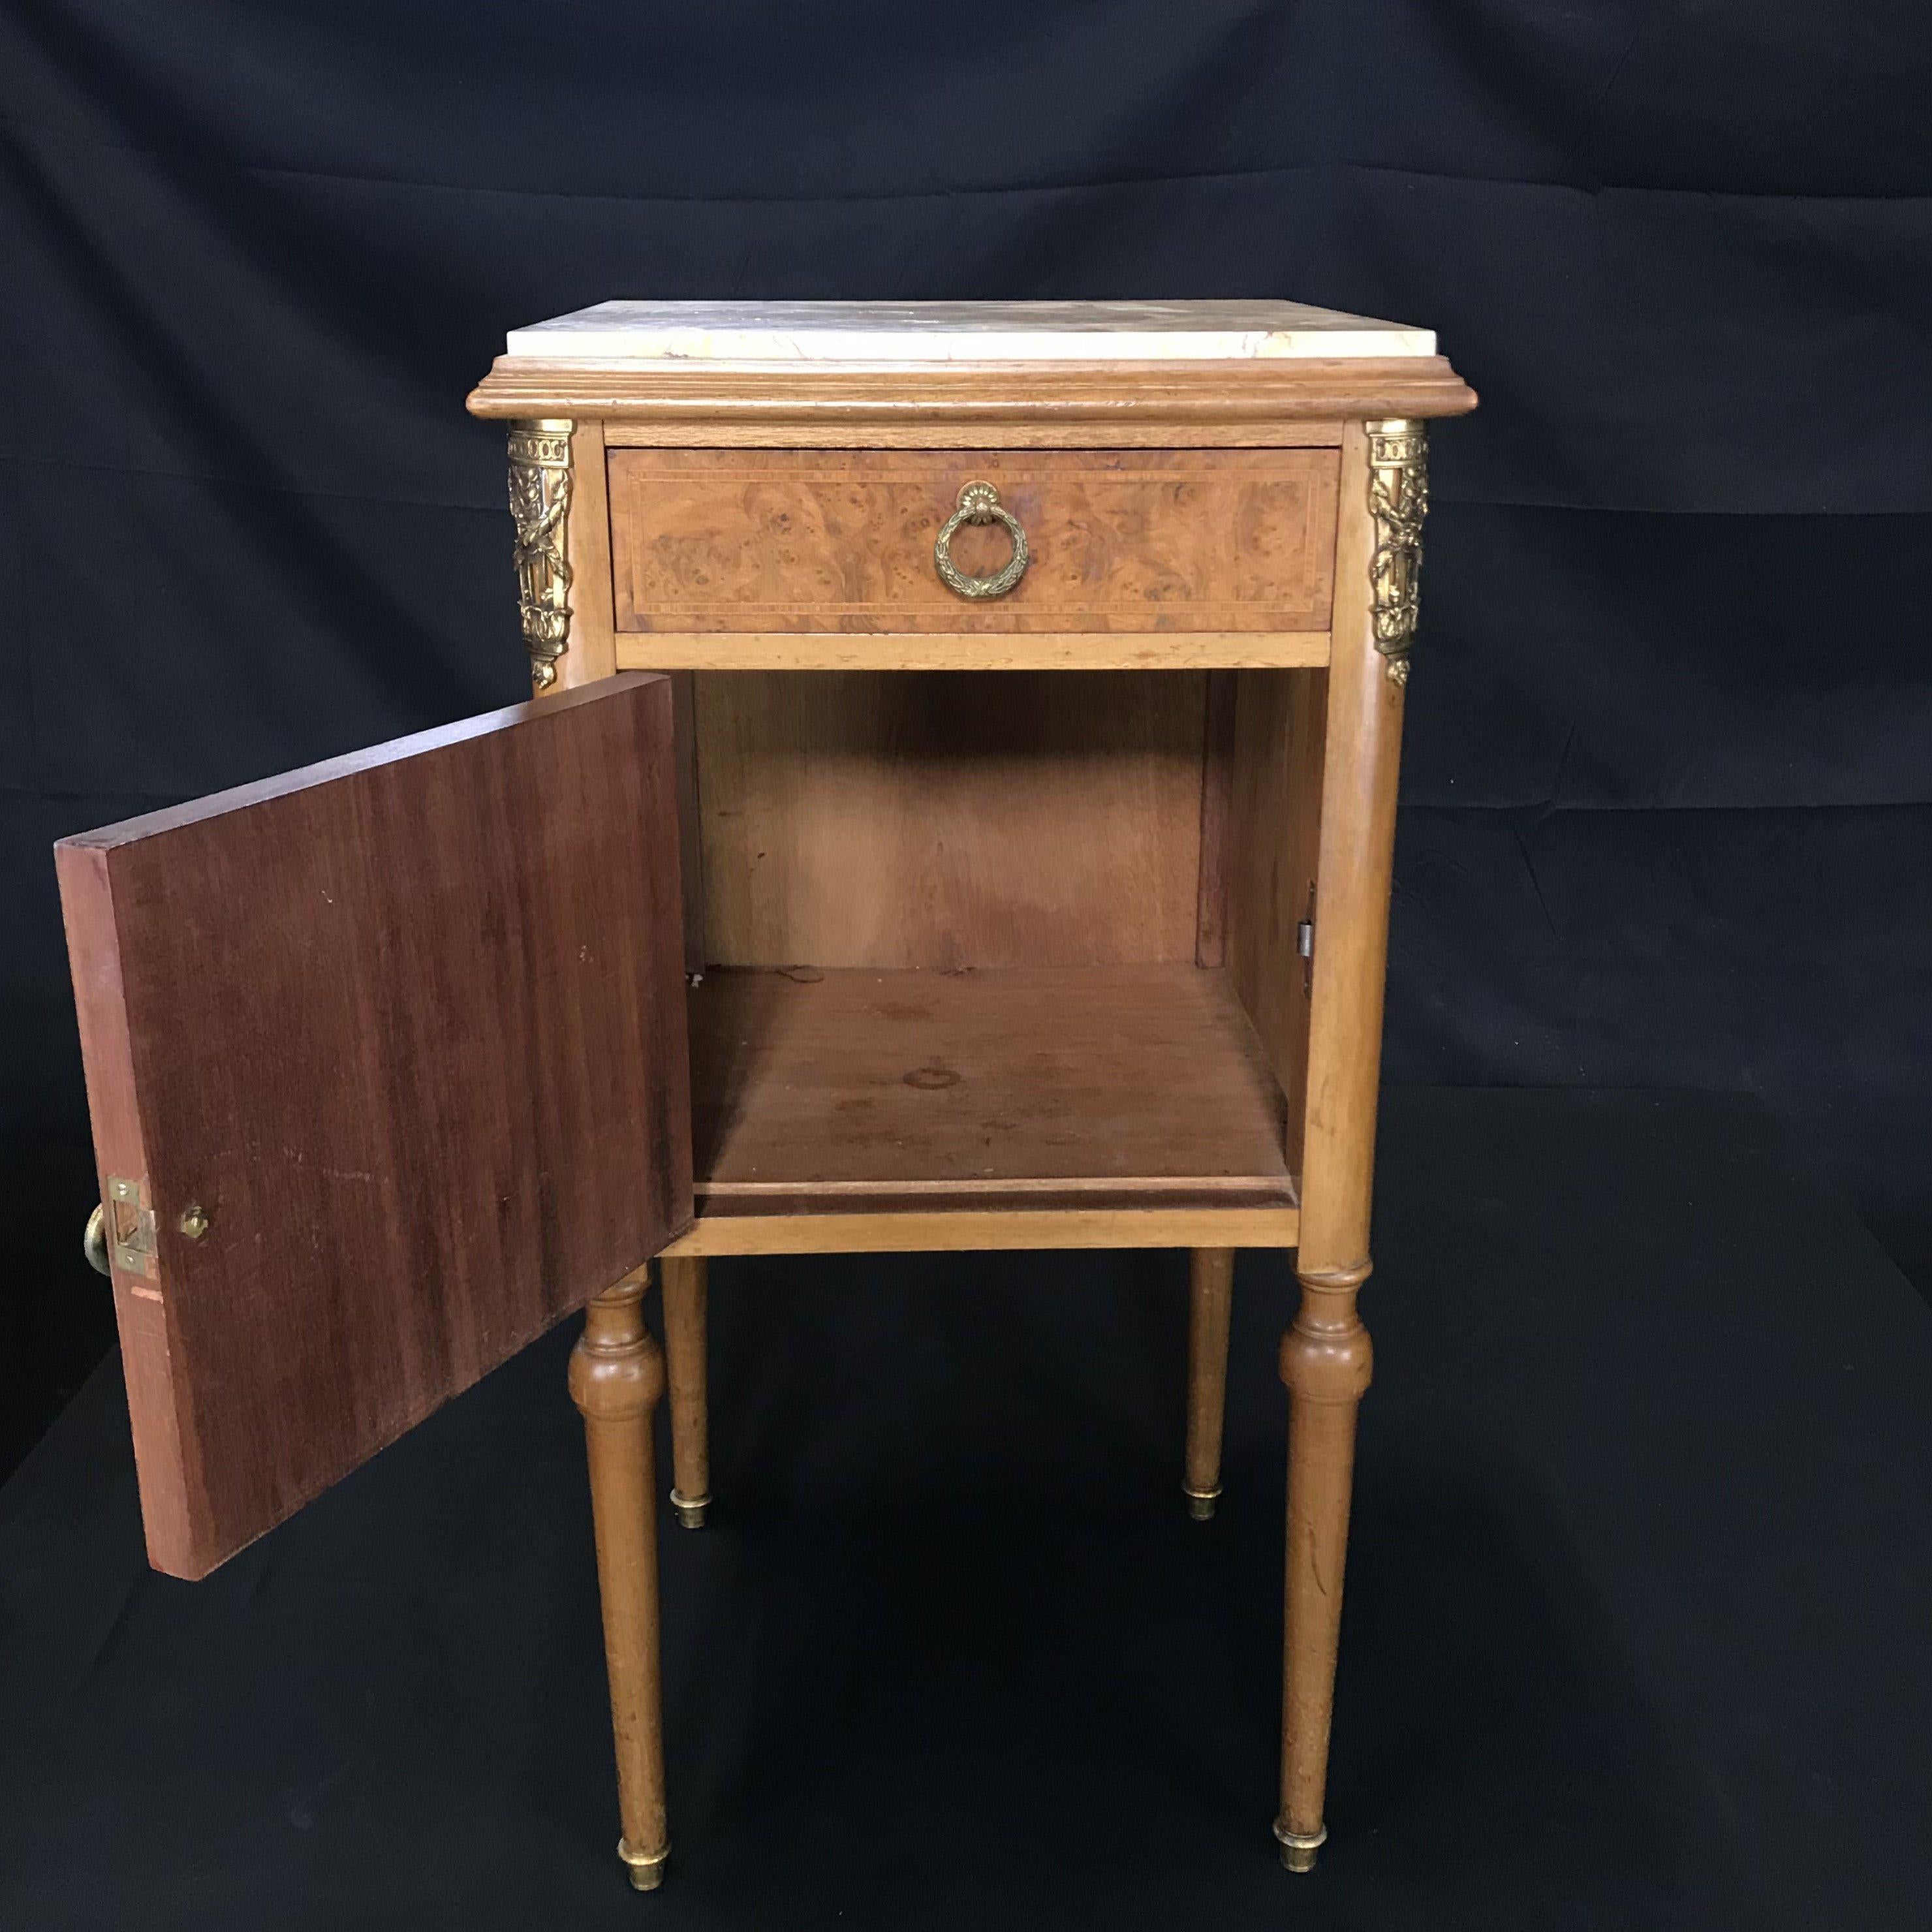 Much versatility in this beautiful inlaid French marble top night stand, bedside table or side table. Lovely inlay on the front under a beige/ivory marble top, with one dovetailed drawer and an open cabinet below. Perfect in a bedroom, bathroom or